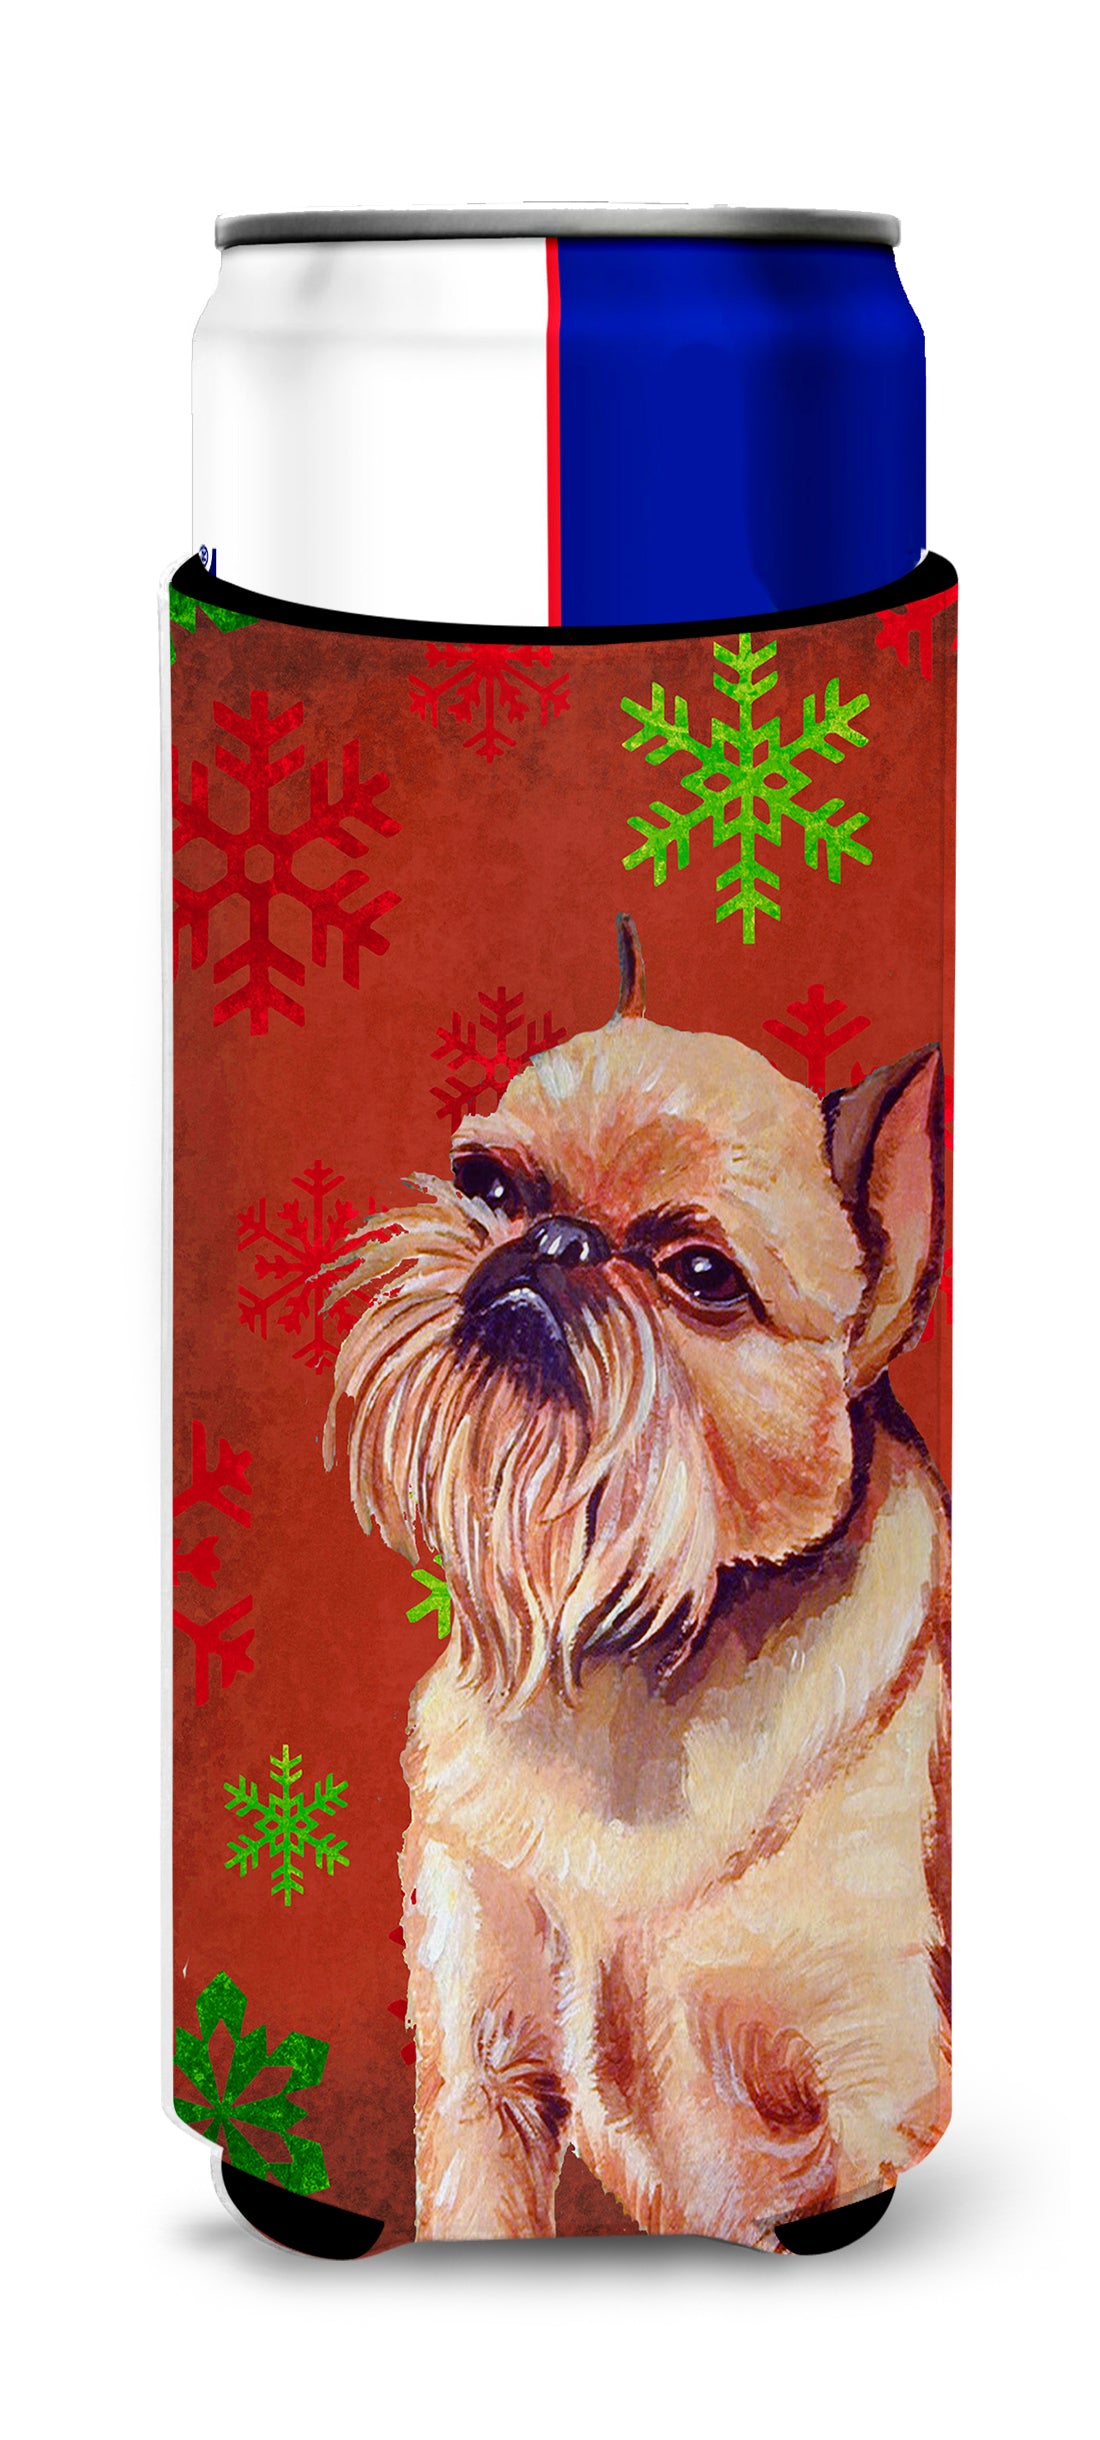 Brussels Griffon Red and Green Snowflakes Holiday Christmas Ultra Beverage Insulators for slim cans LH9314MUK.